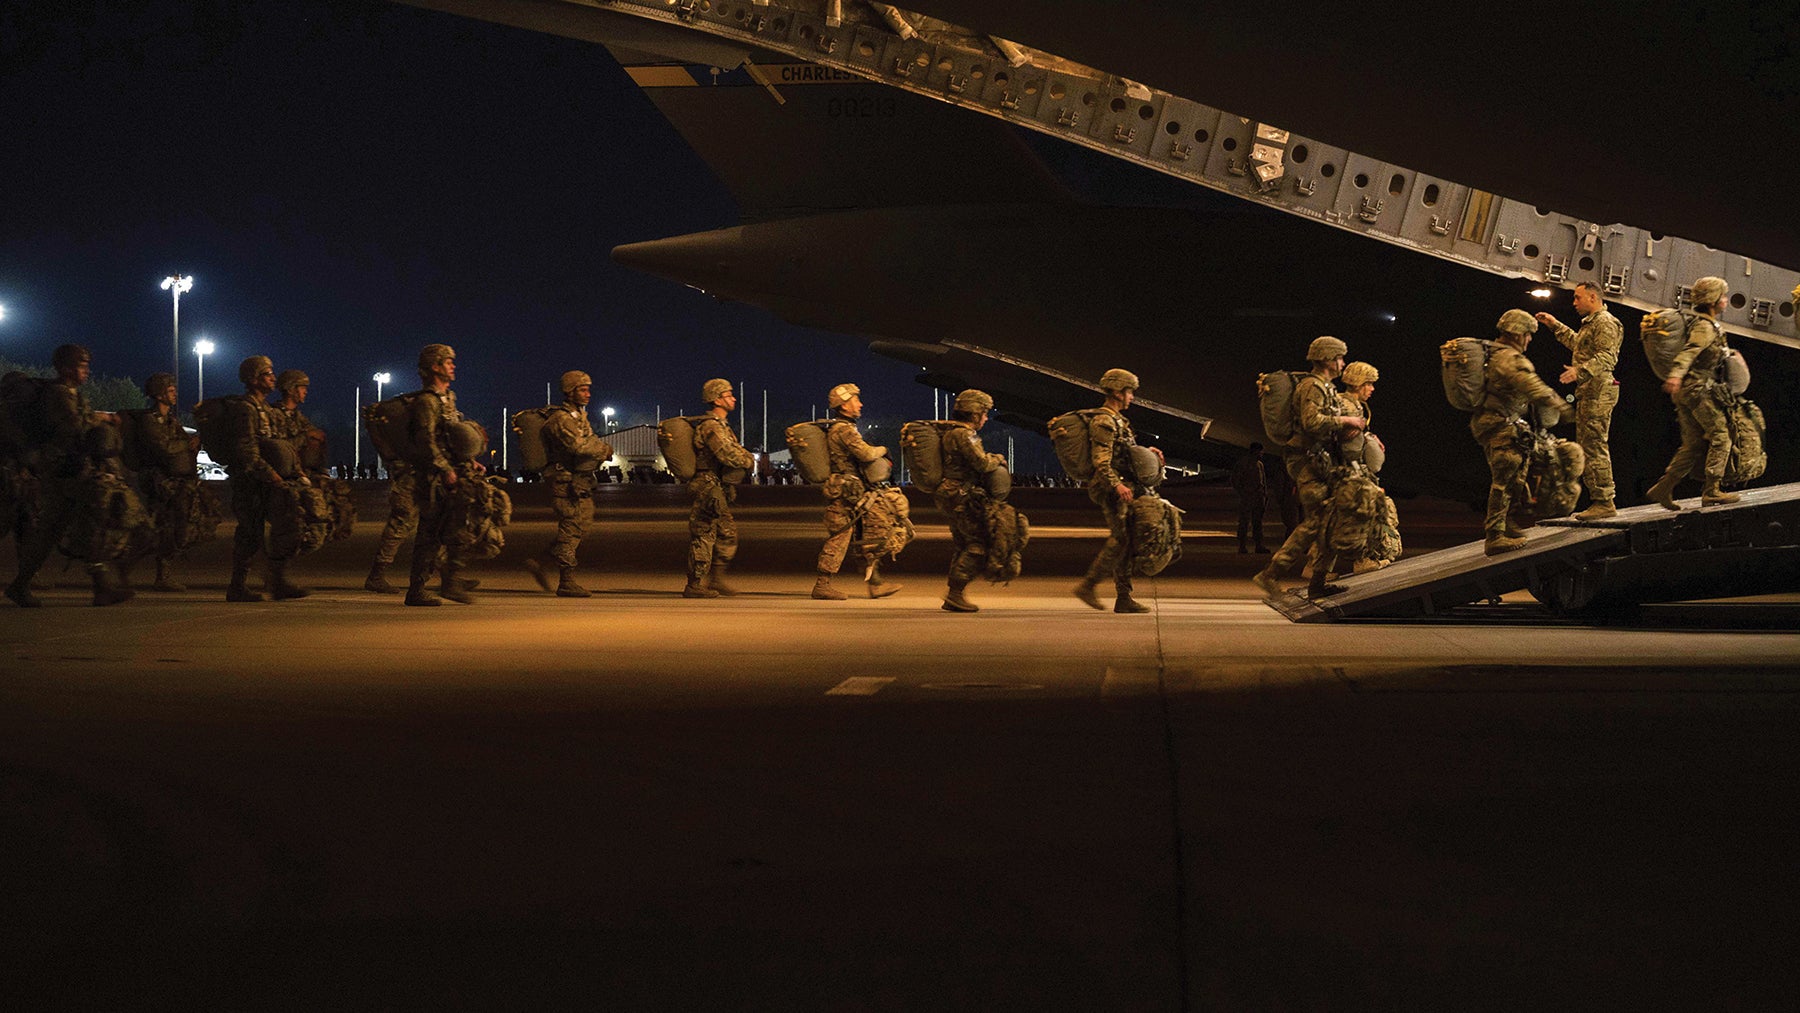 Paratroopers with the 82nd Airborne Division board a C-17 Globemaster III cargo aircraft at Pope Army Airfield, North Carolina, during a training exercise. (Credit: U.S. Air Force/Airman 1st Class Charles Casner)